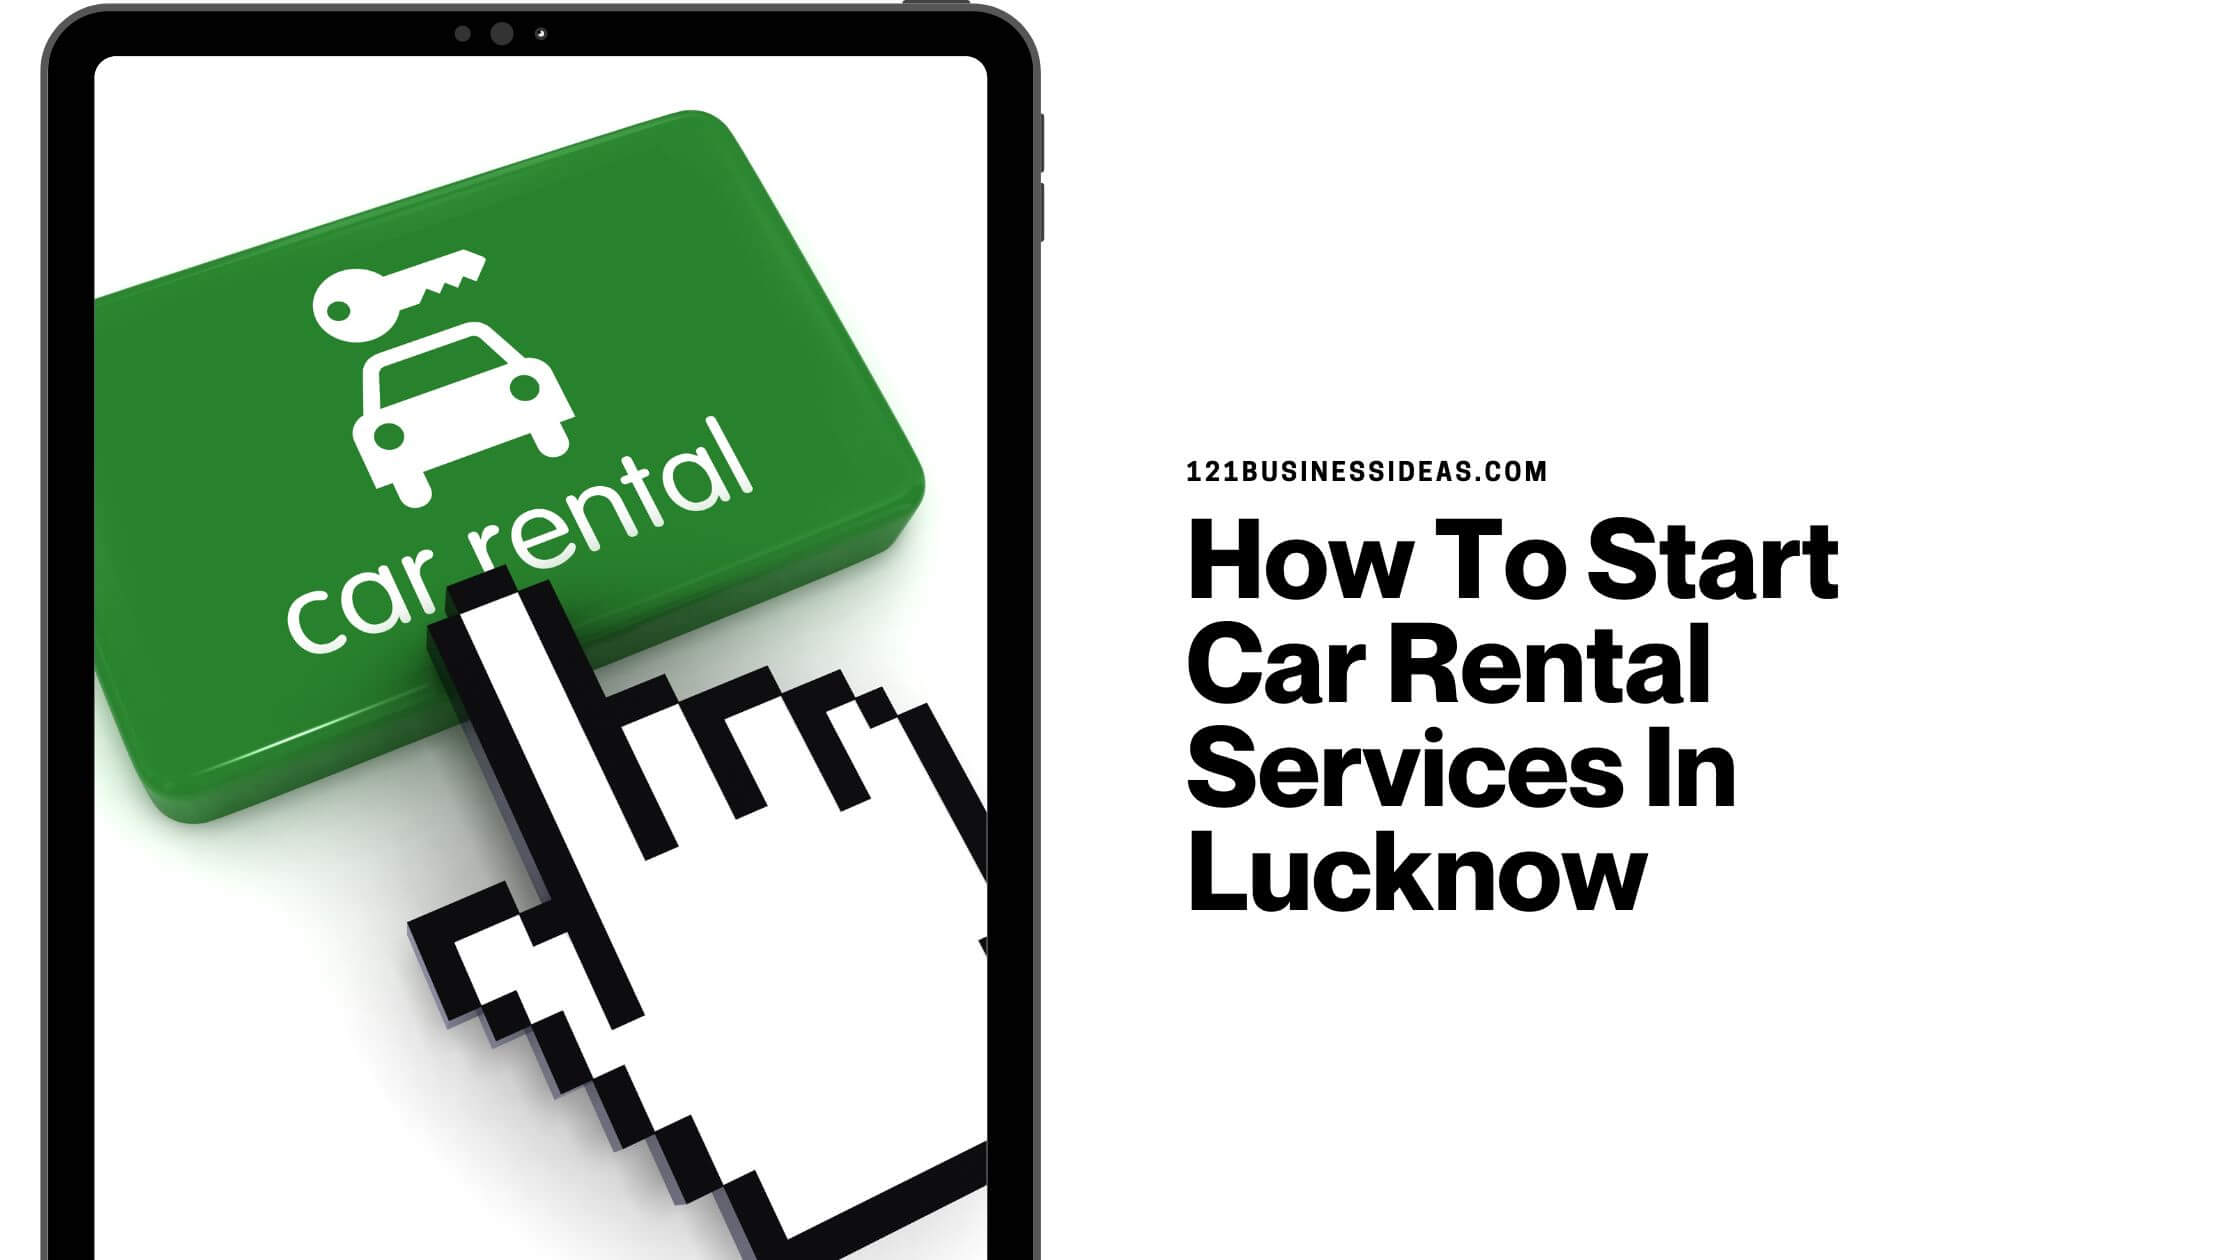 How To Start Car Rental Services In Lucknow (1)